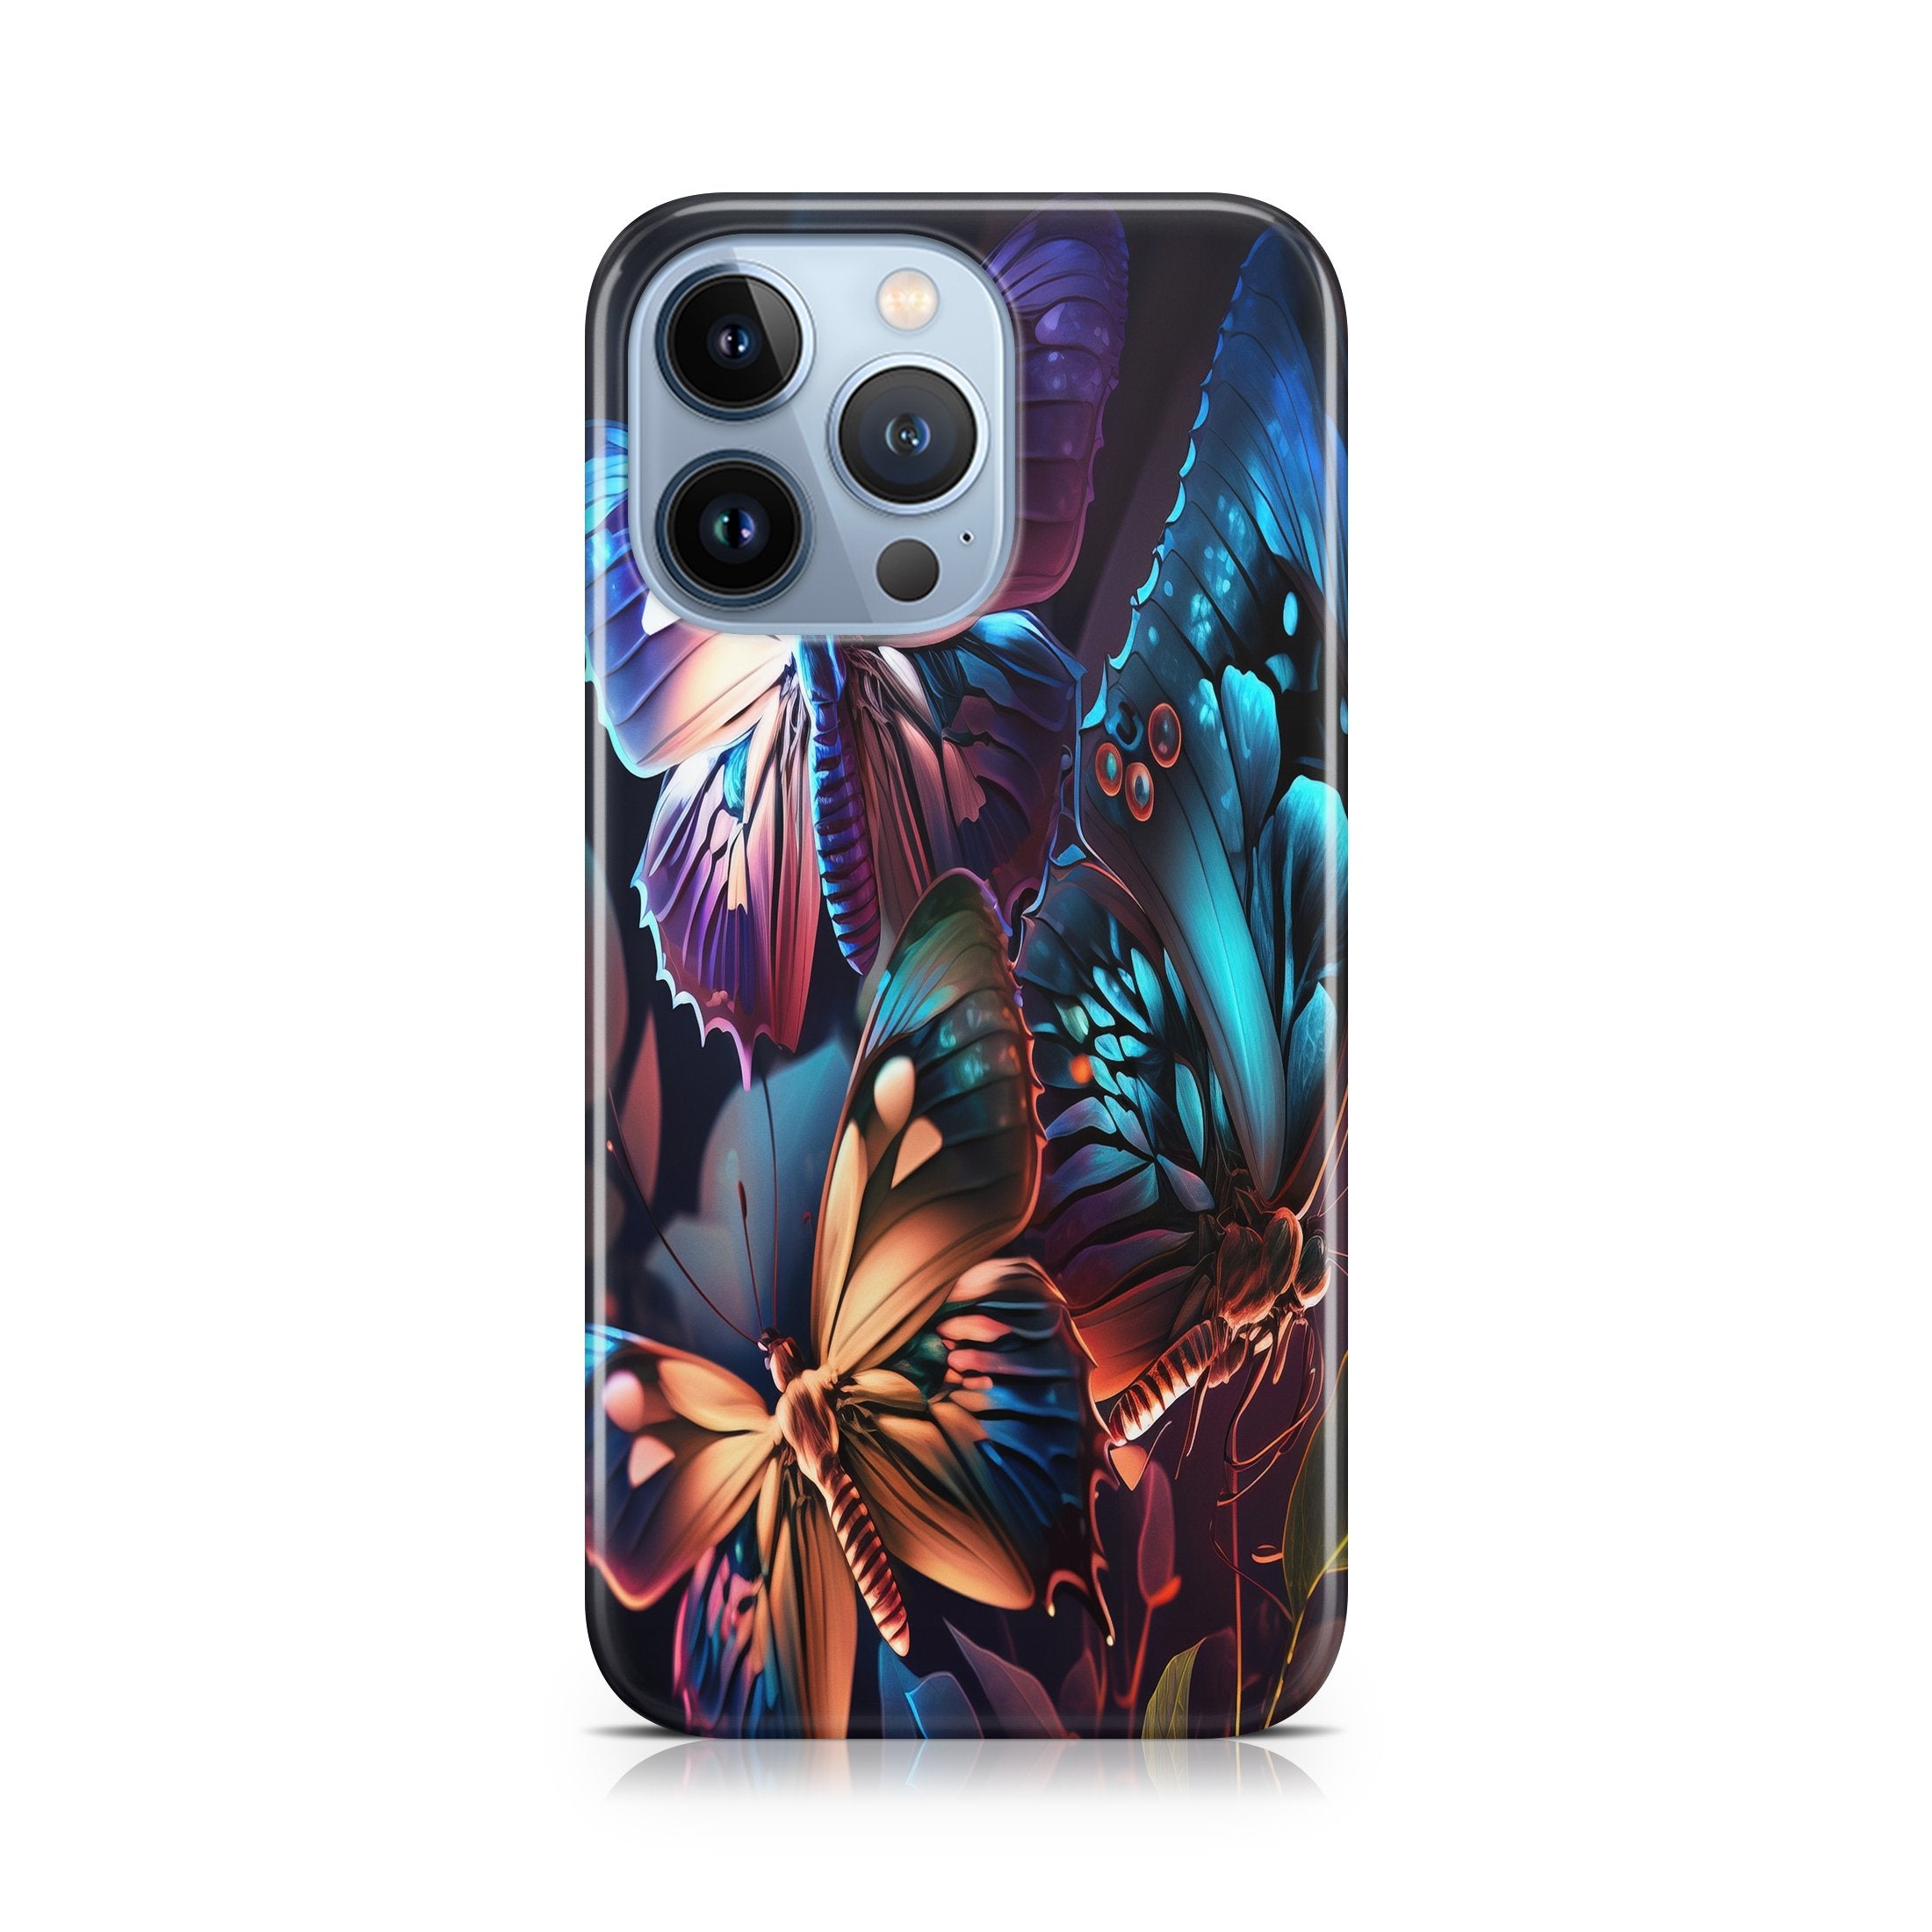 Shadow Butterflies - iPhone phone case designs by CaseSwagger